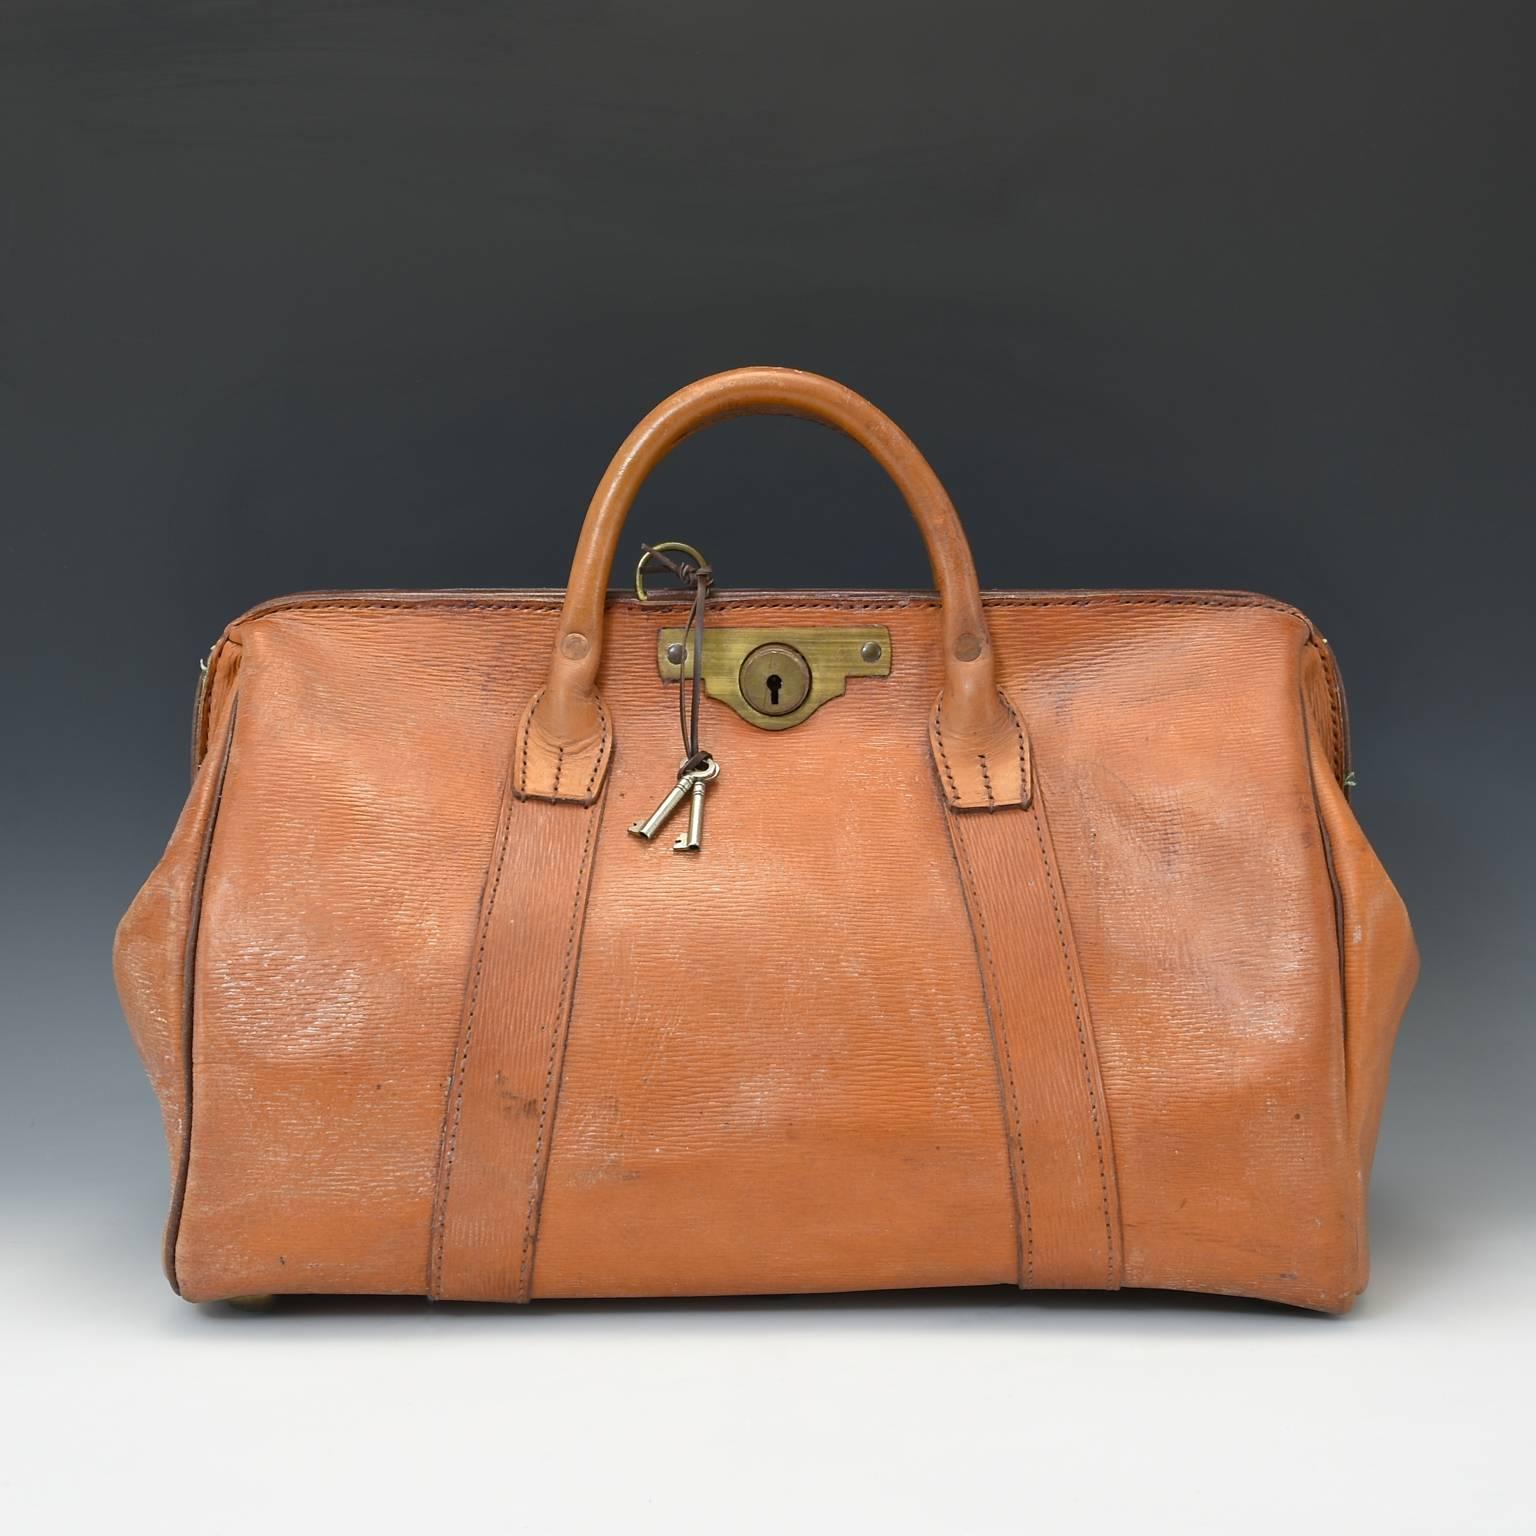 Unusual British banker's cash bag in sturdy leather with ‘straw grain’ finish excellent condition in the style of a Gladstone bag. Has original leather interior and brass lockable catch with keys, circa 1950.

Bentleys are Members of LAPADA, the